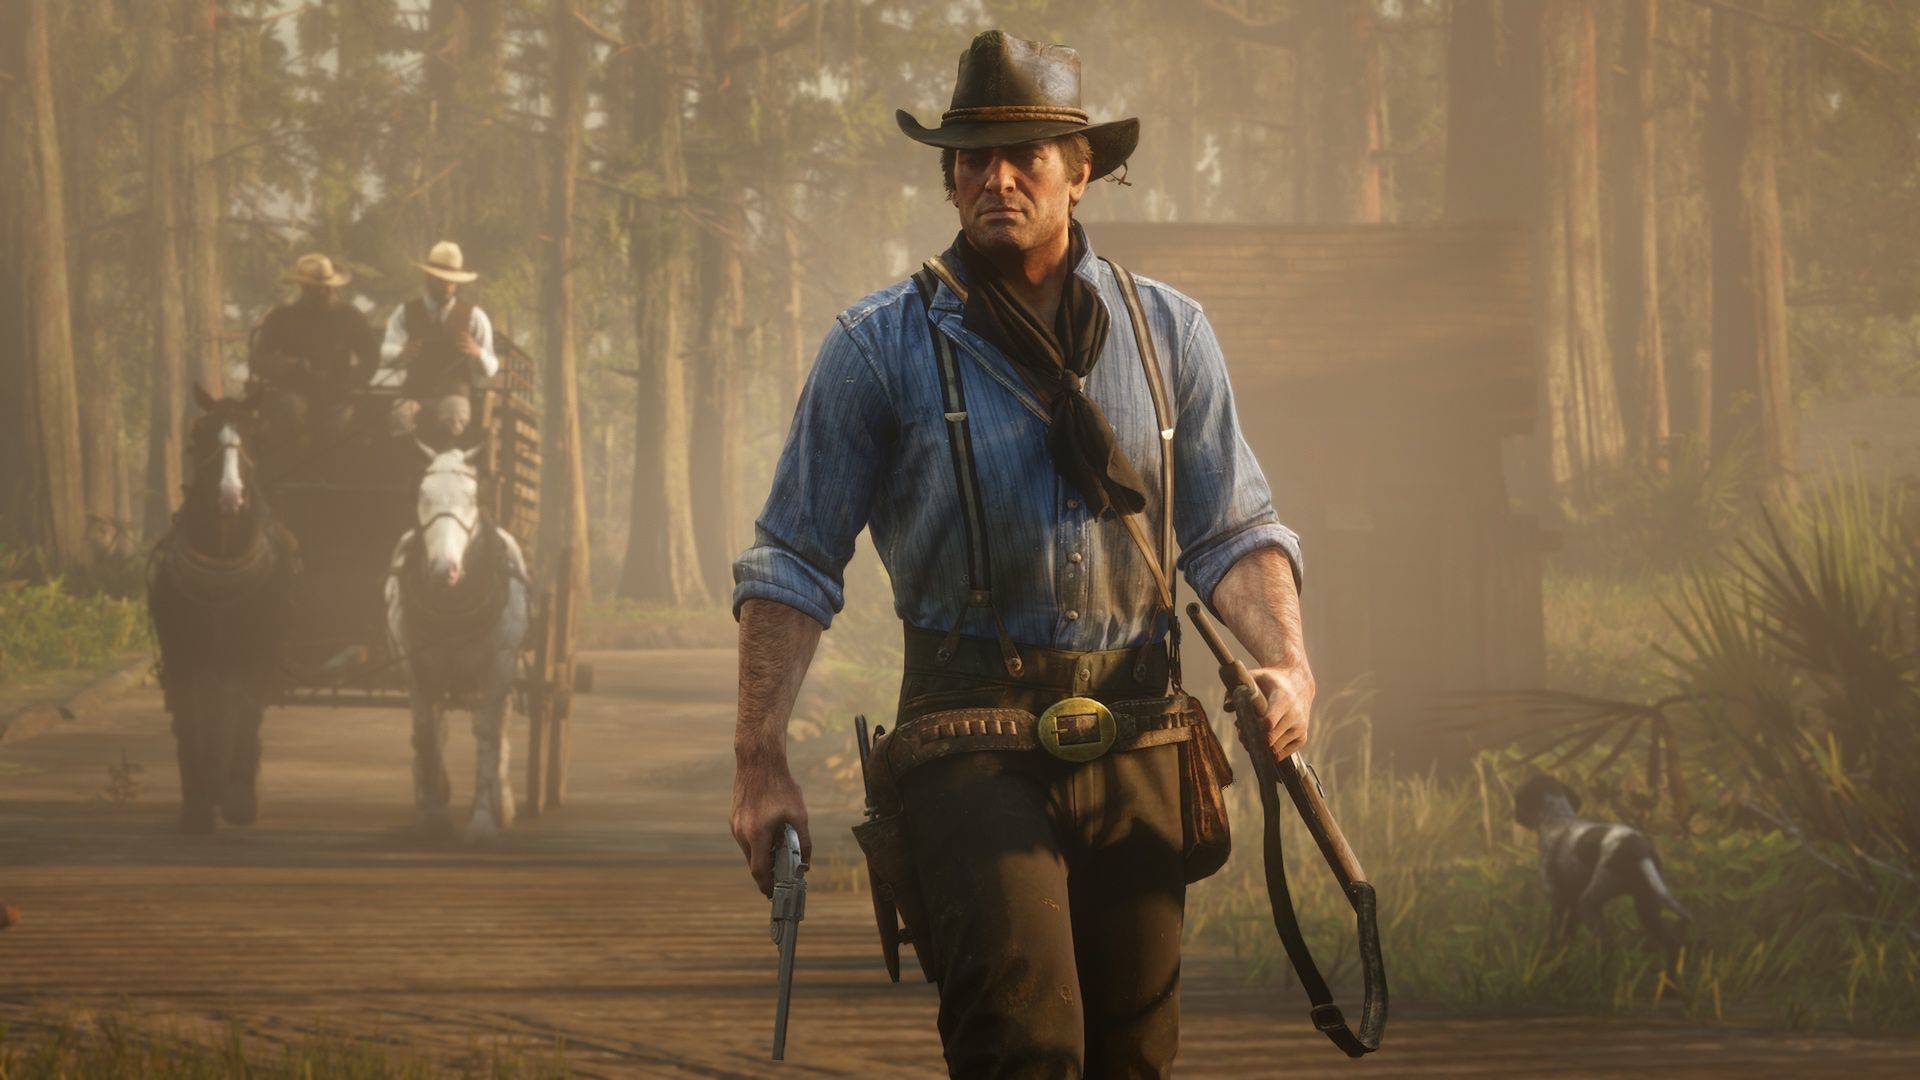 Hopefully Rockstar will announce RDR2 for the PS5 and Xbox Series